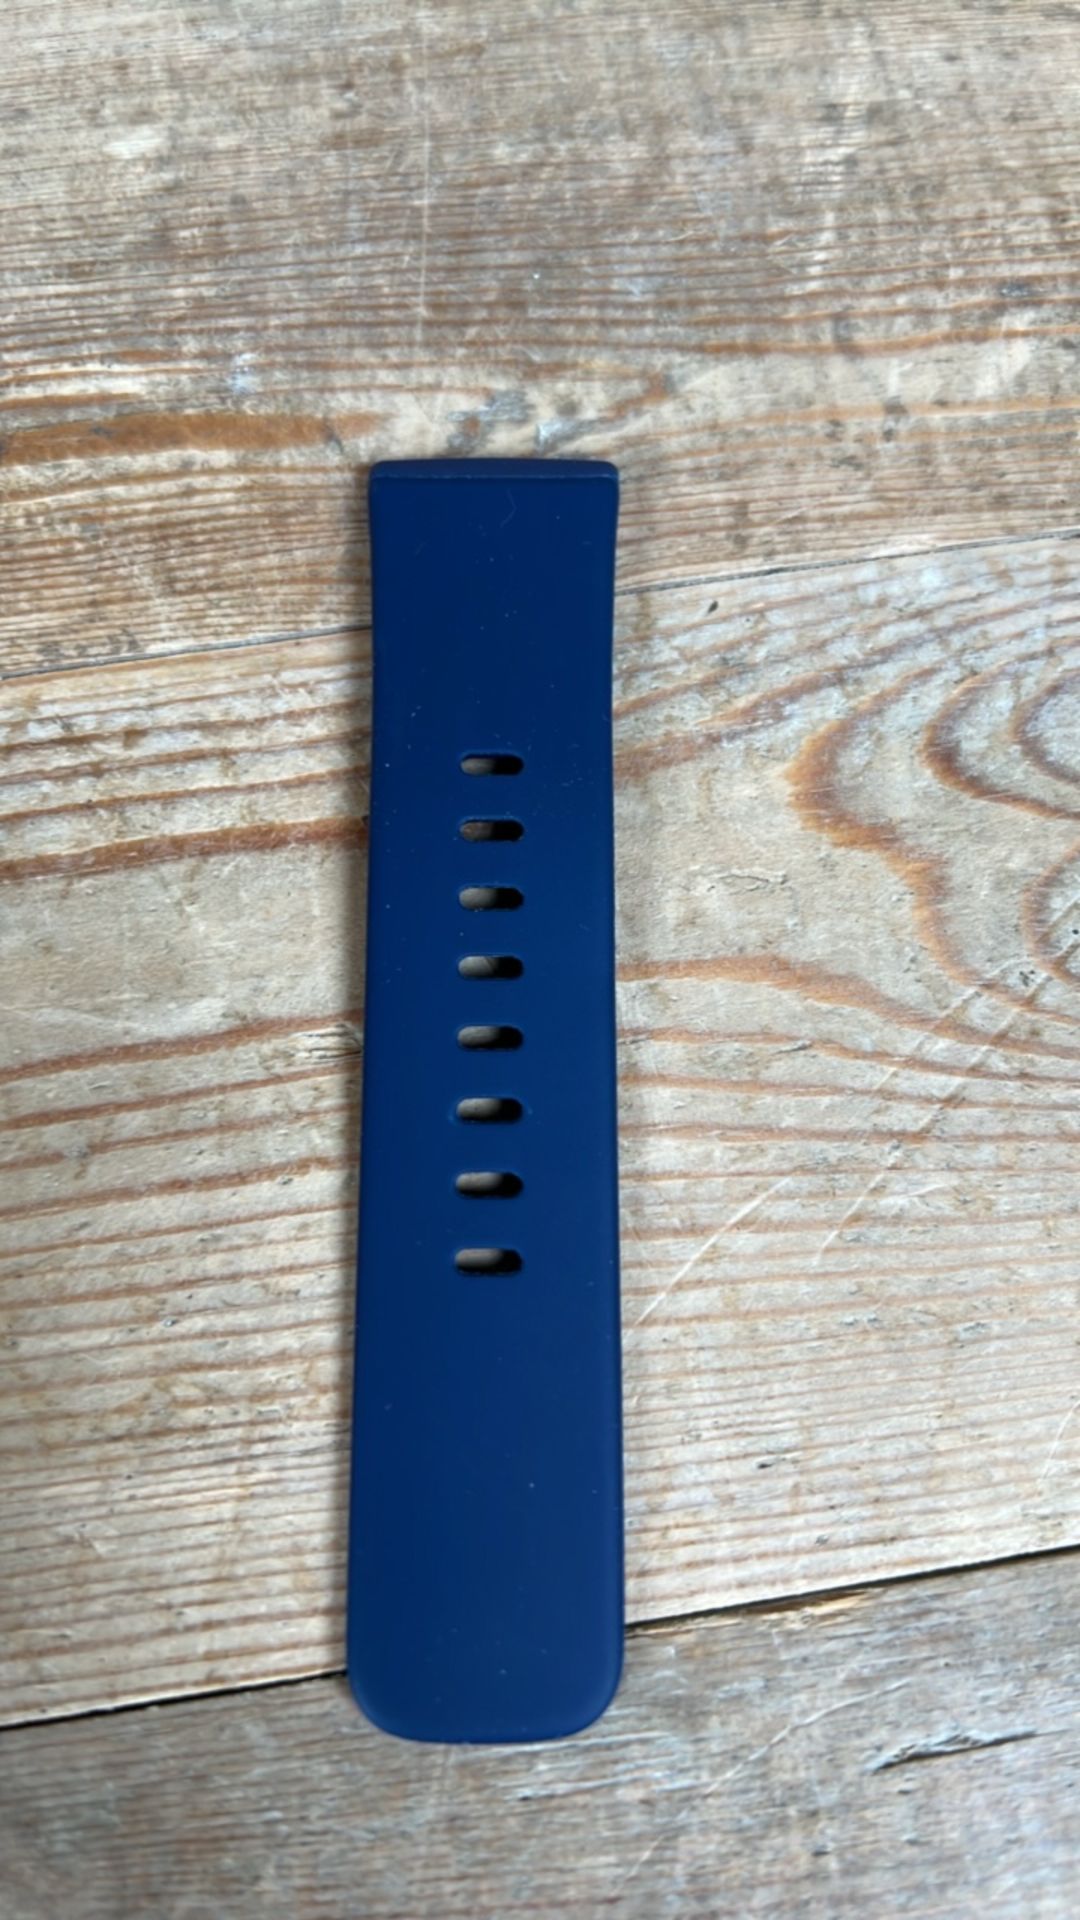 Fitbit Versa 3 Soft Gold With Midnight Blue Band - Image 4 of 4